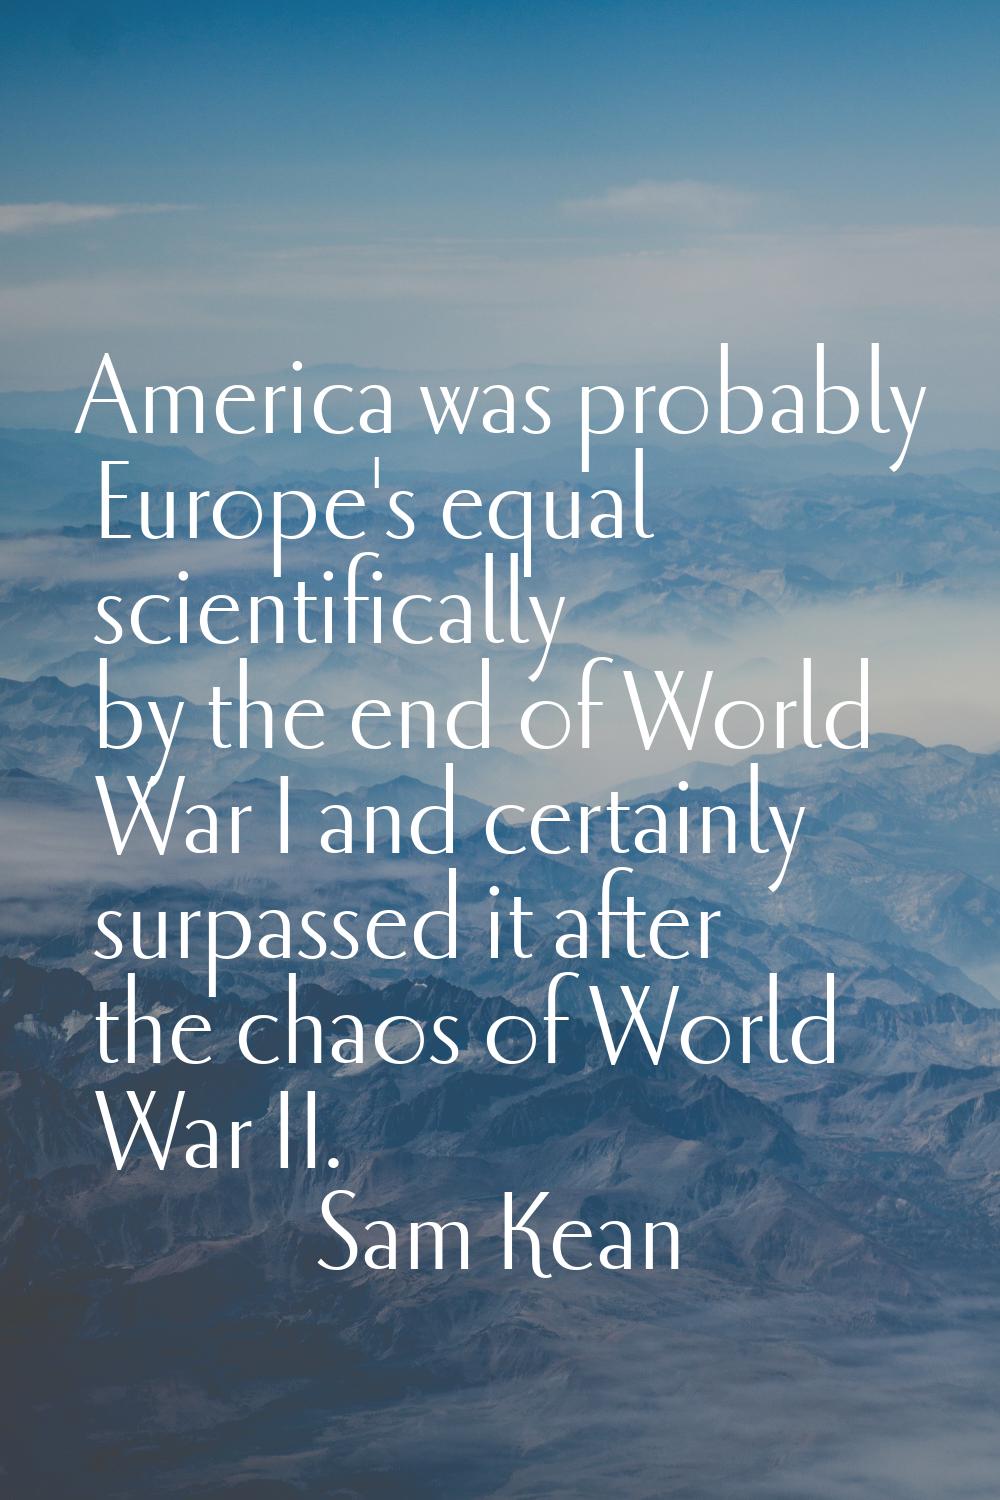 America was probably Europe's equal scientifically by the end of World War I and certainly surpasse